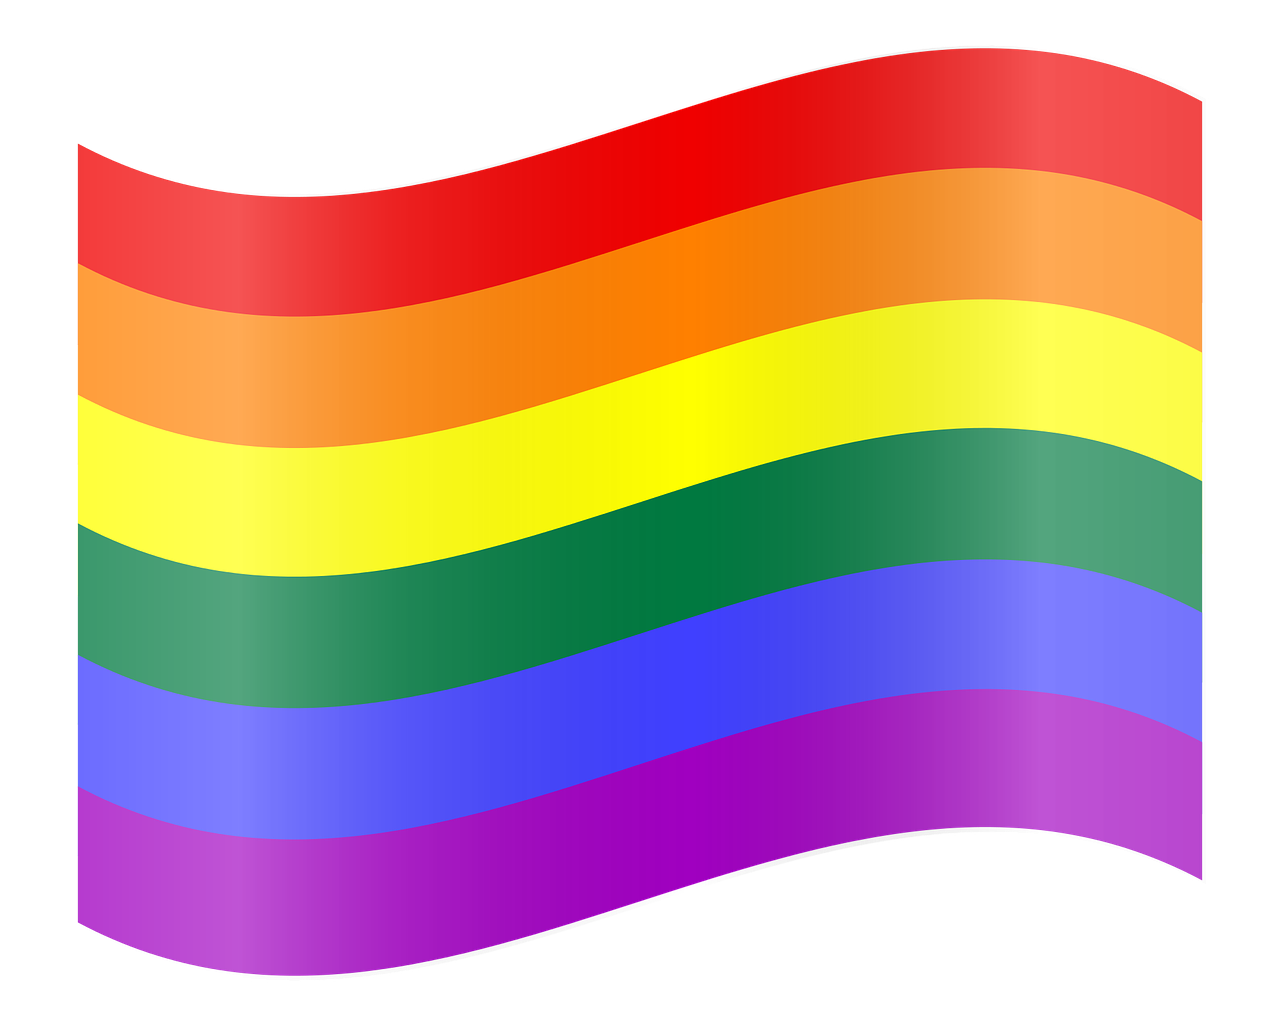 Funding to Support LGBT+ Communities During COVID-19 Pandemic